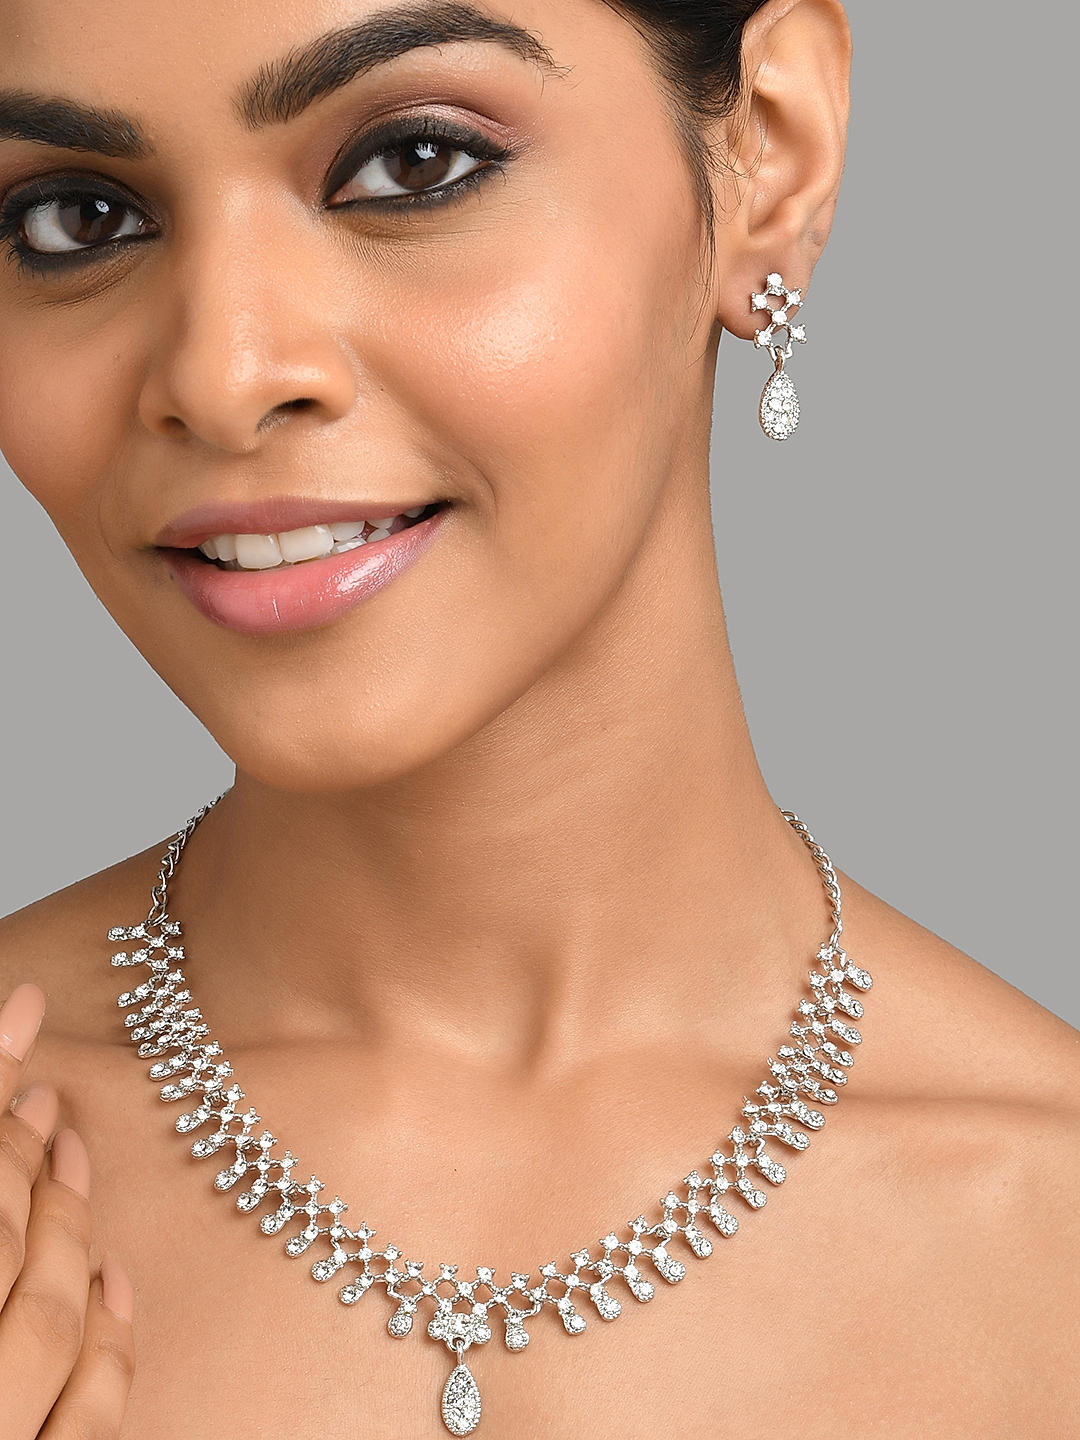 Crystal Necklace Set with Diamond Look - Enchanted Crystal Necklace Set by  Blingvine